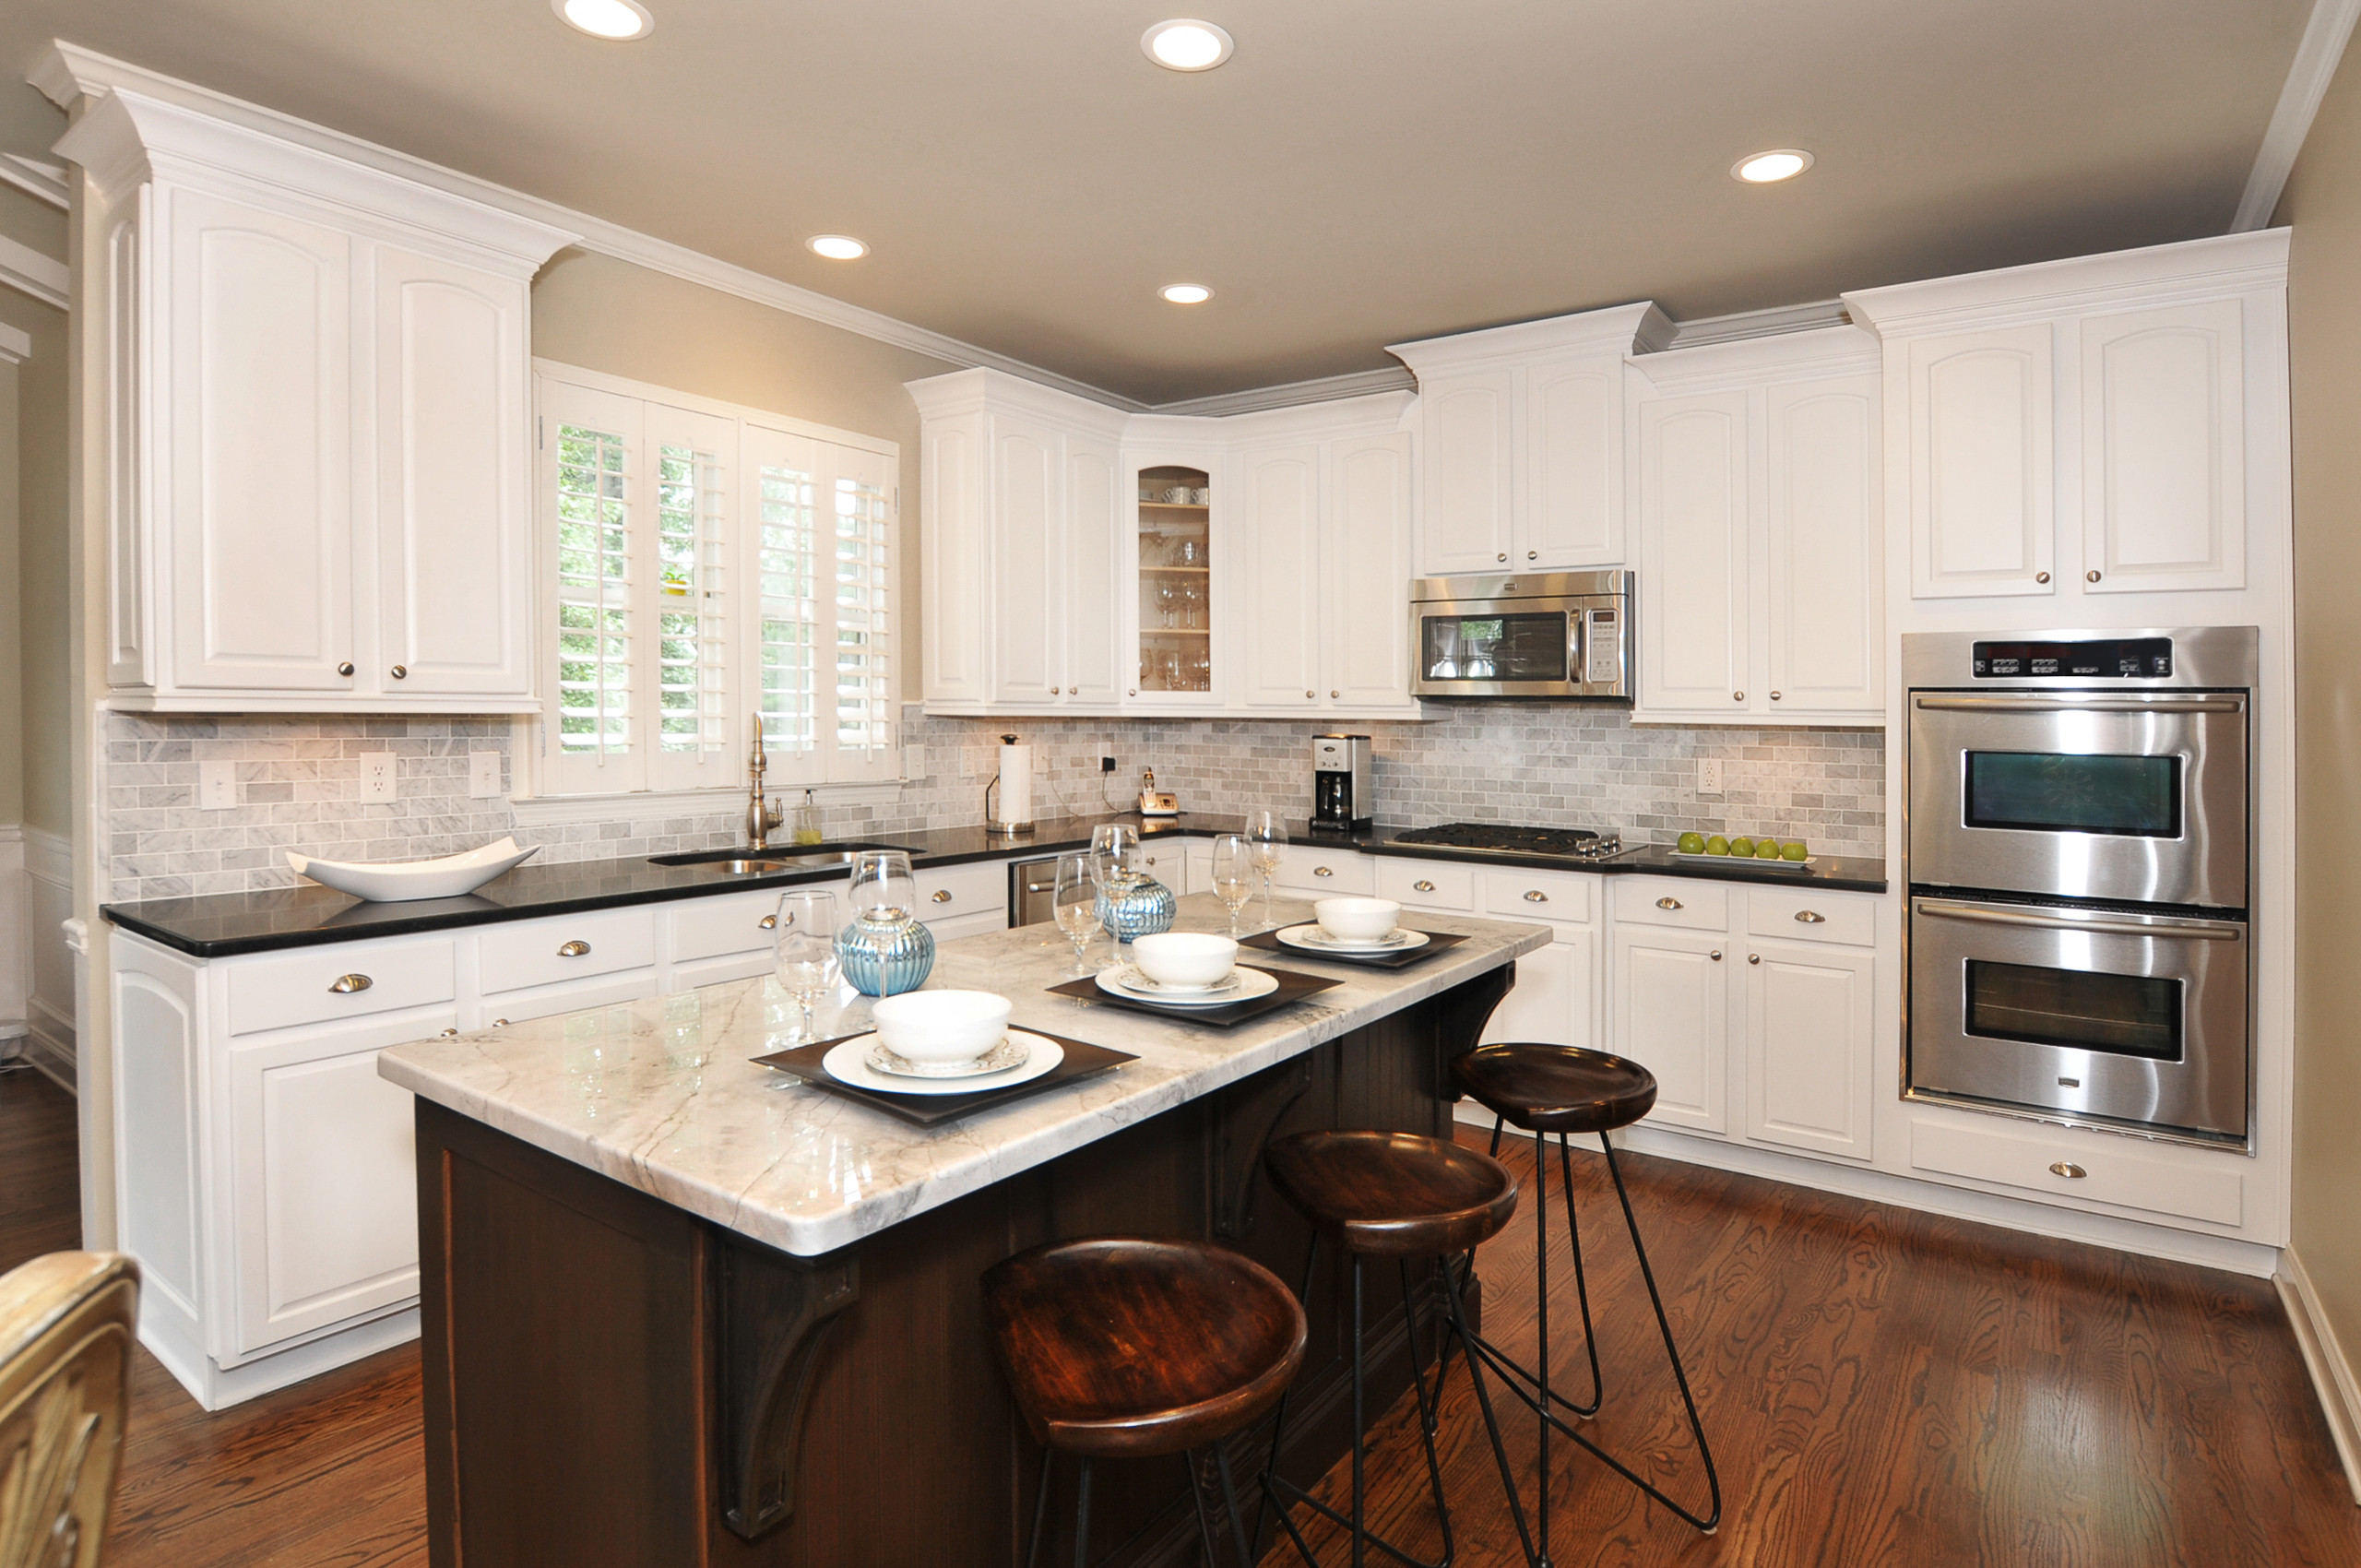 Off-White Cabinets With Dark Countertops